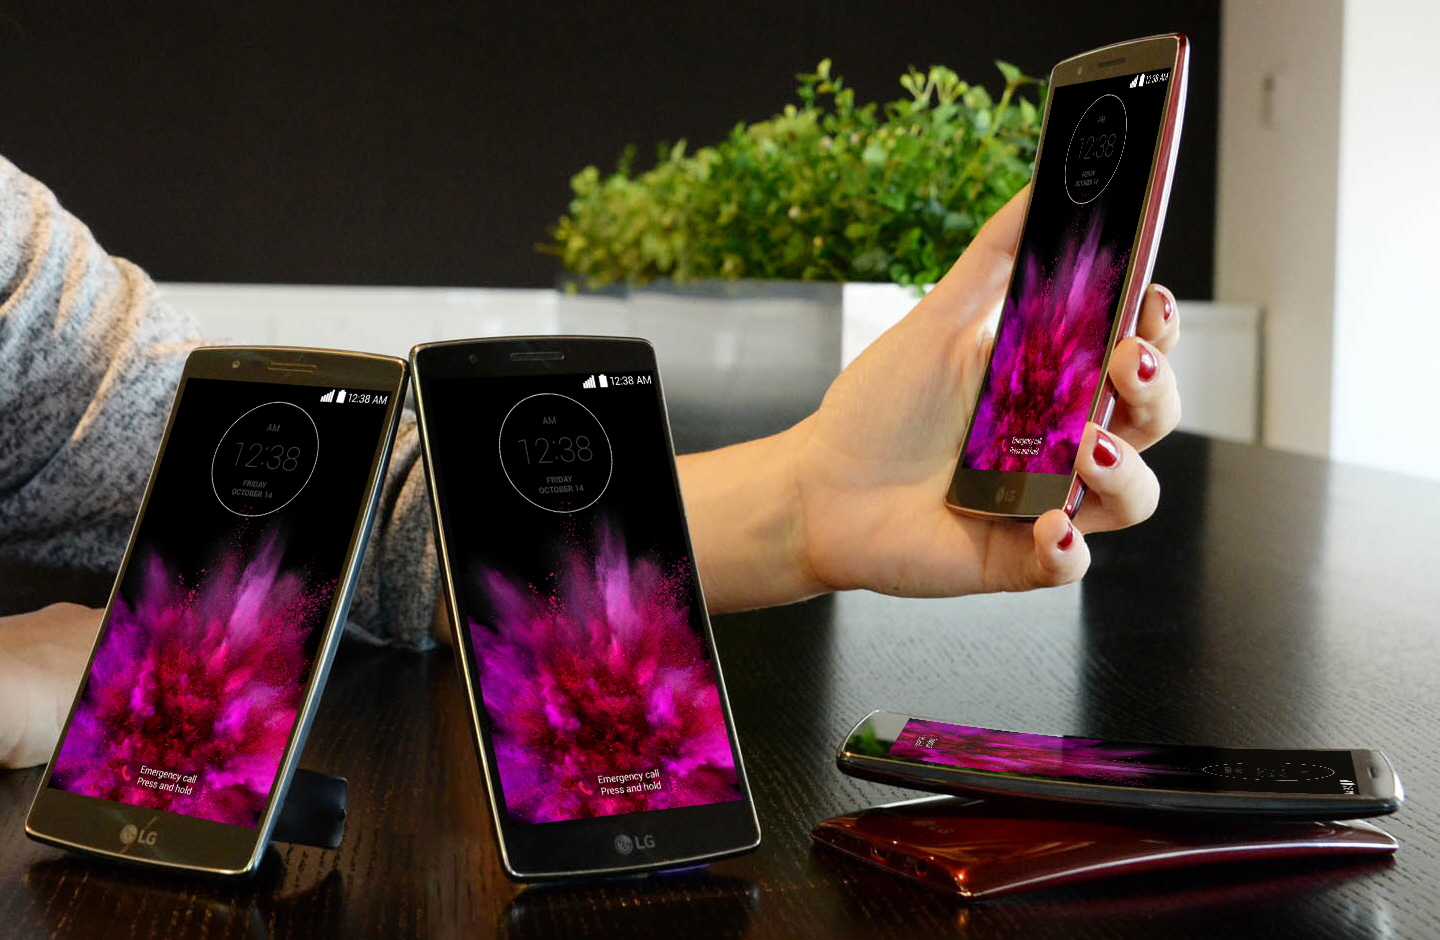 Mobile World Congress (MWC), set to begin next week in Barcelona, LG Electronics (LG) today announced the global rollout of its eagerly anticipated curved smartphone, G Flex2.(Image: LG Electronics)